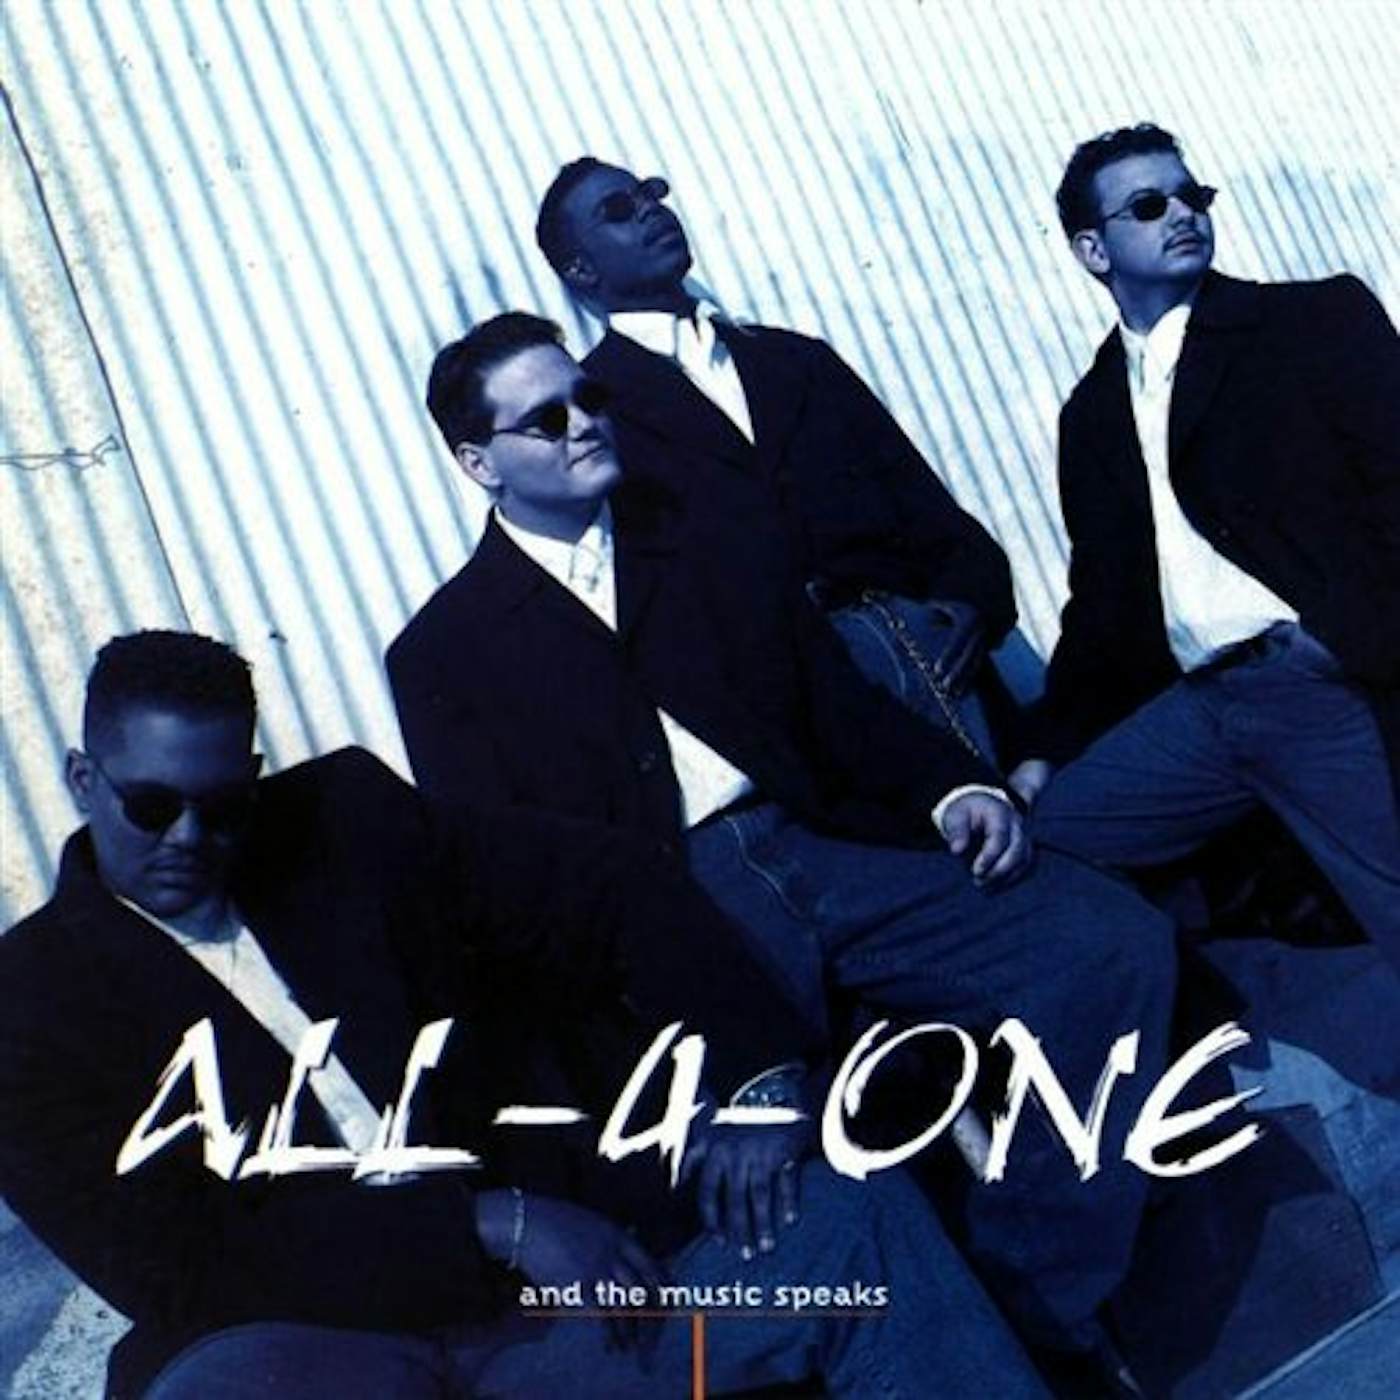 All-4-One AND THE MUSIC SPEAKS CD